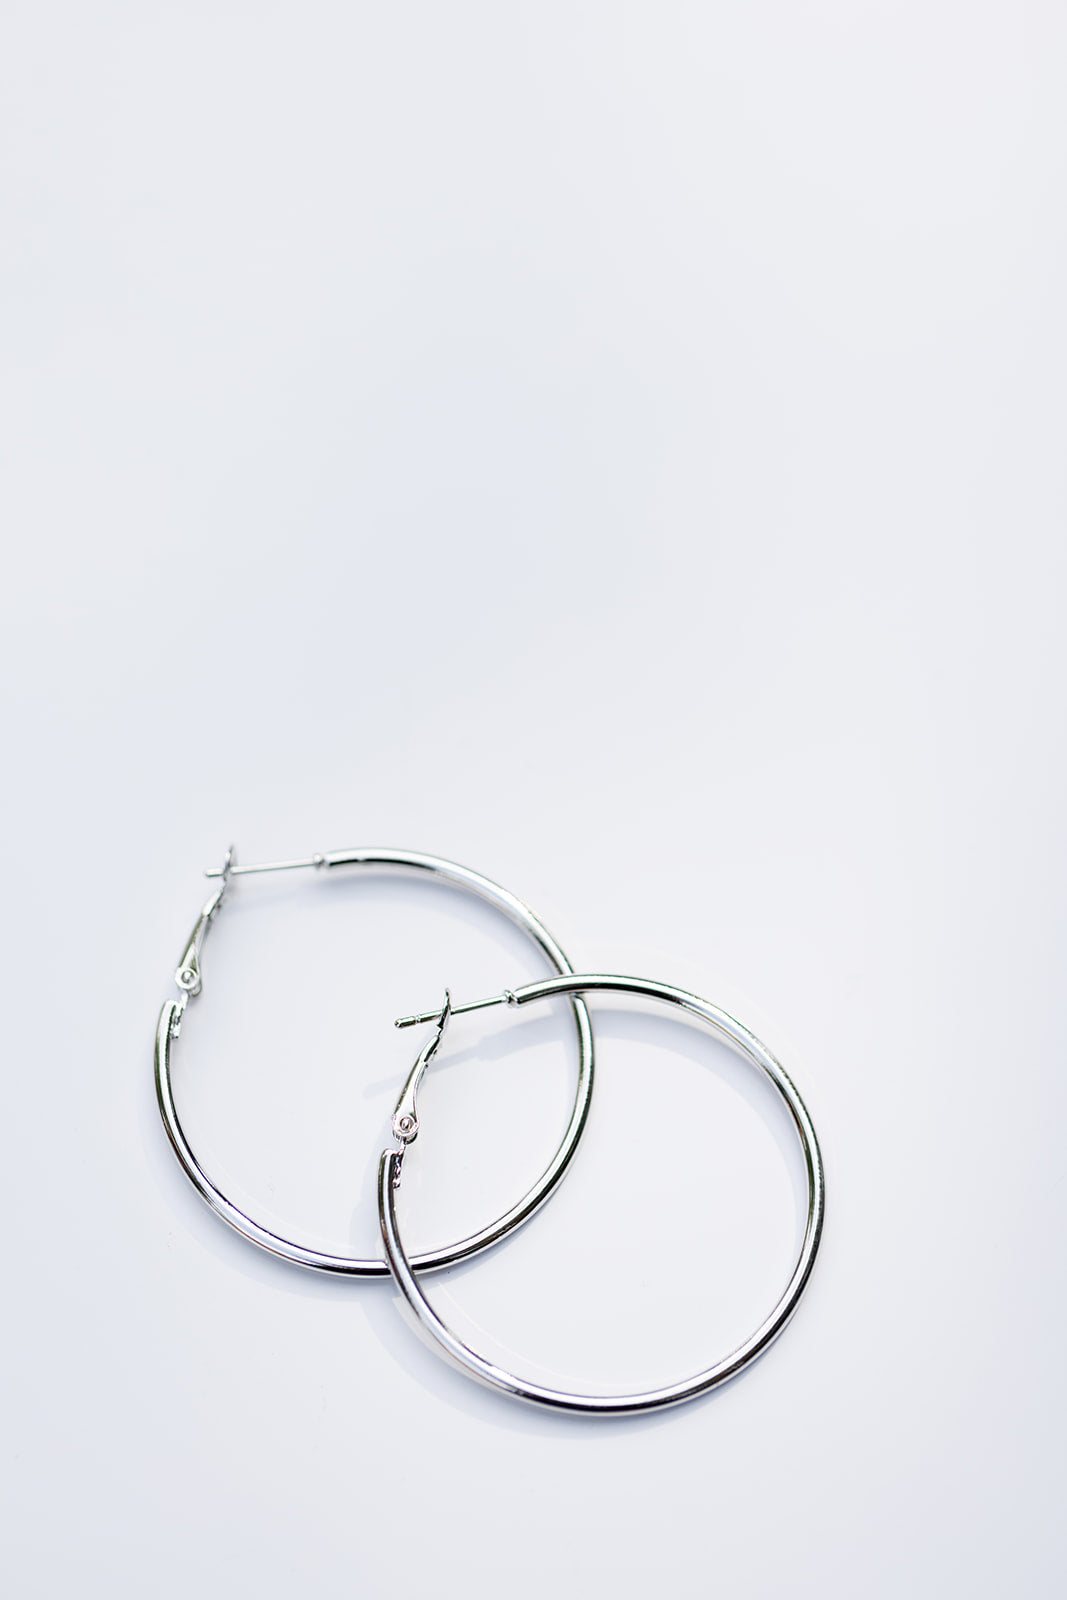 Donatello Gian 925 Sterling Silver Classic French Lock Hoop Earrings -  Silver 15mm - 38 requests | Flip App